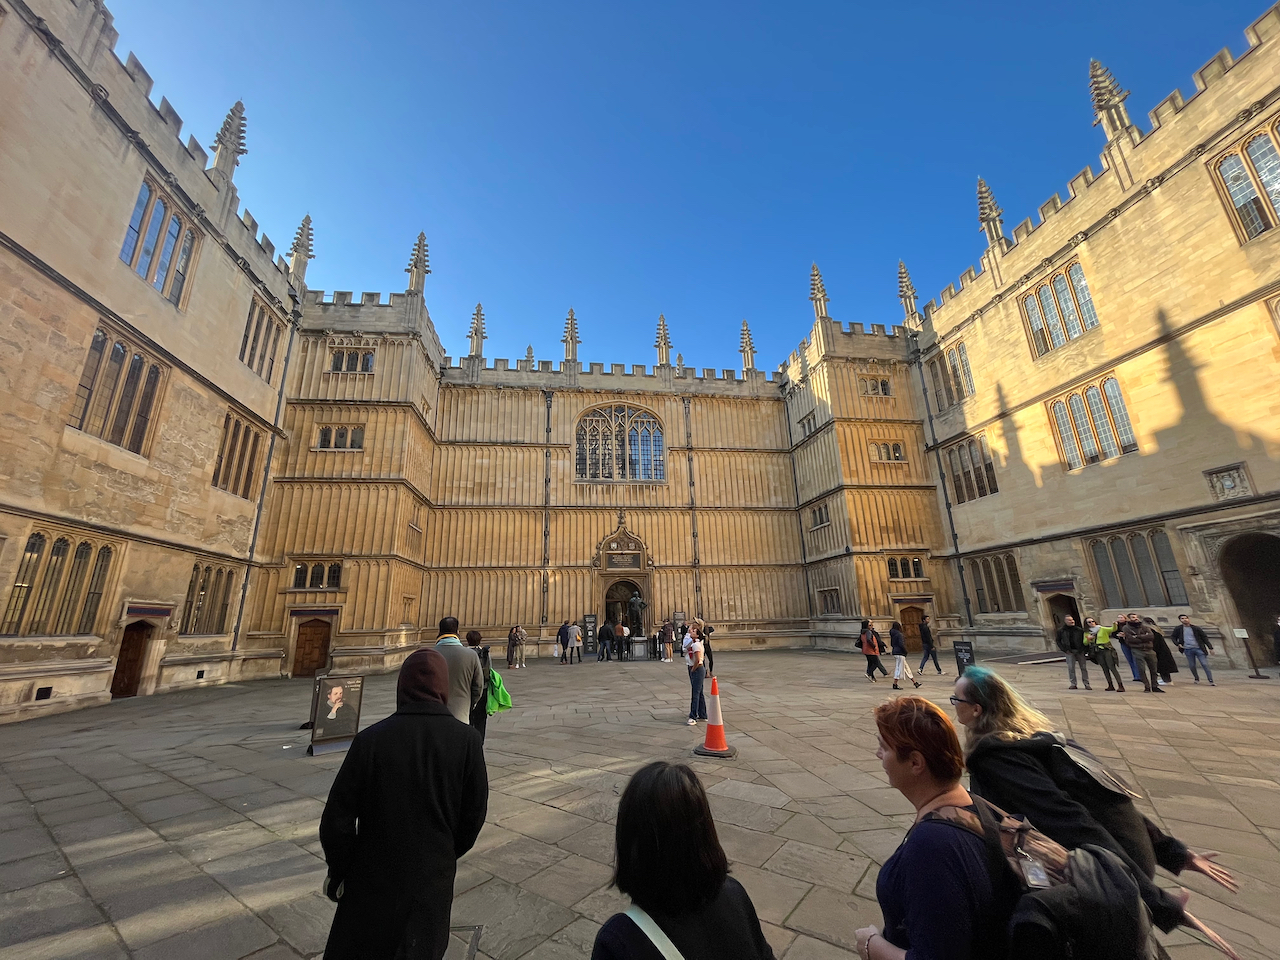 The large quadrangle of the Bodleian Library. The section ahead has 4 floors, with a large ornate arched window in the centre of the top 2 floors, while the left and right sections of the building have 3 levels.